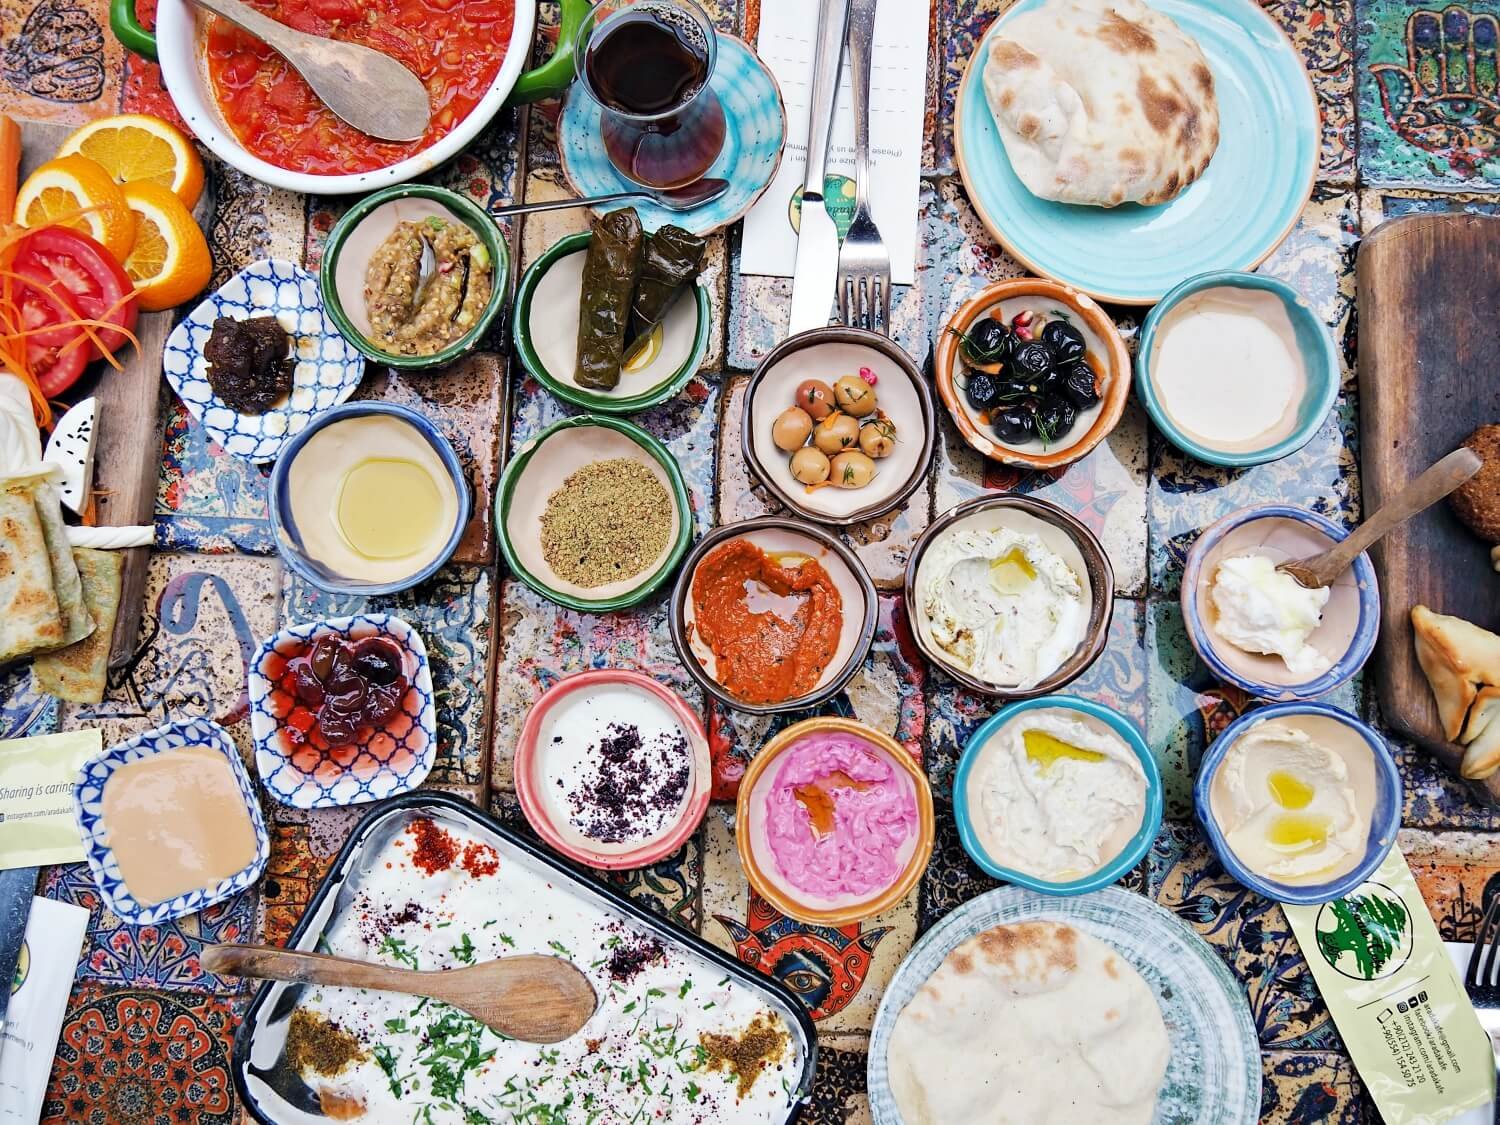 A traditional Turkish breakfast at Arada Cafe in Istanbul